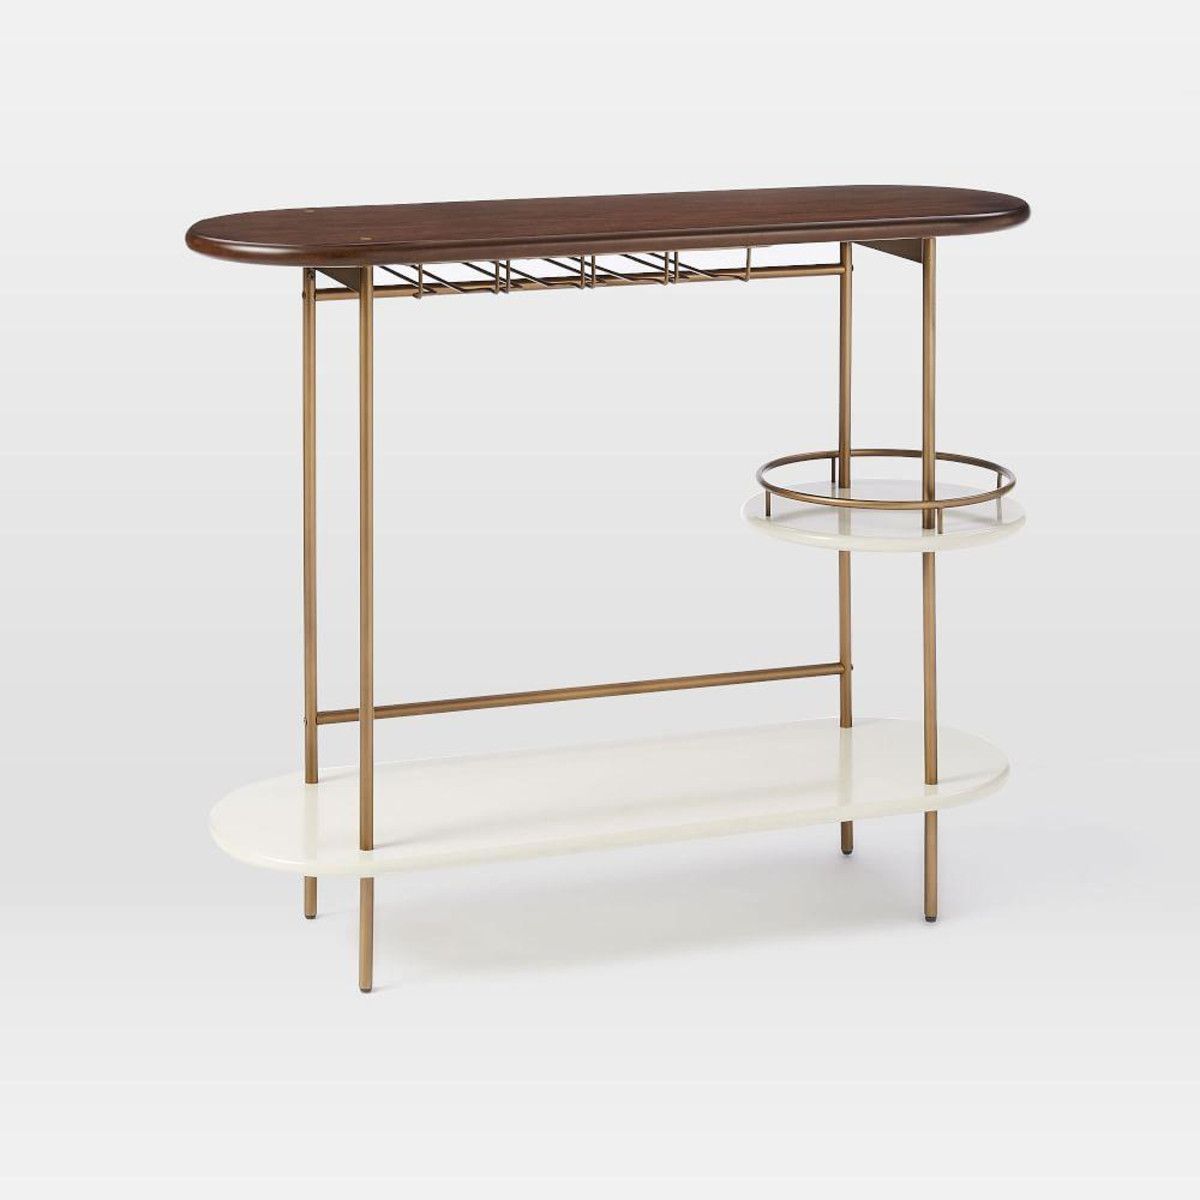 Tiered Bar Console | Bar Carts | Pinterest | Consoles, Bar And Bar Carts In Elke Marble Console Tables With Polished Aluminum Base (View 14 of 30)